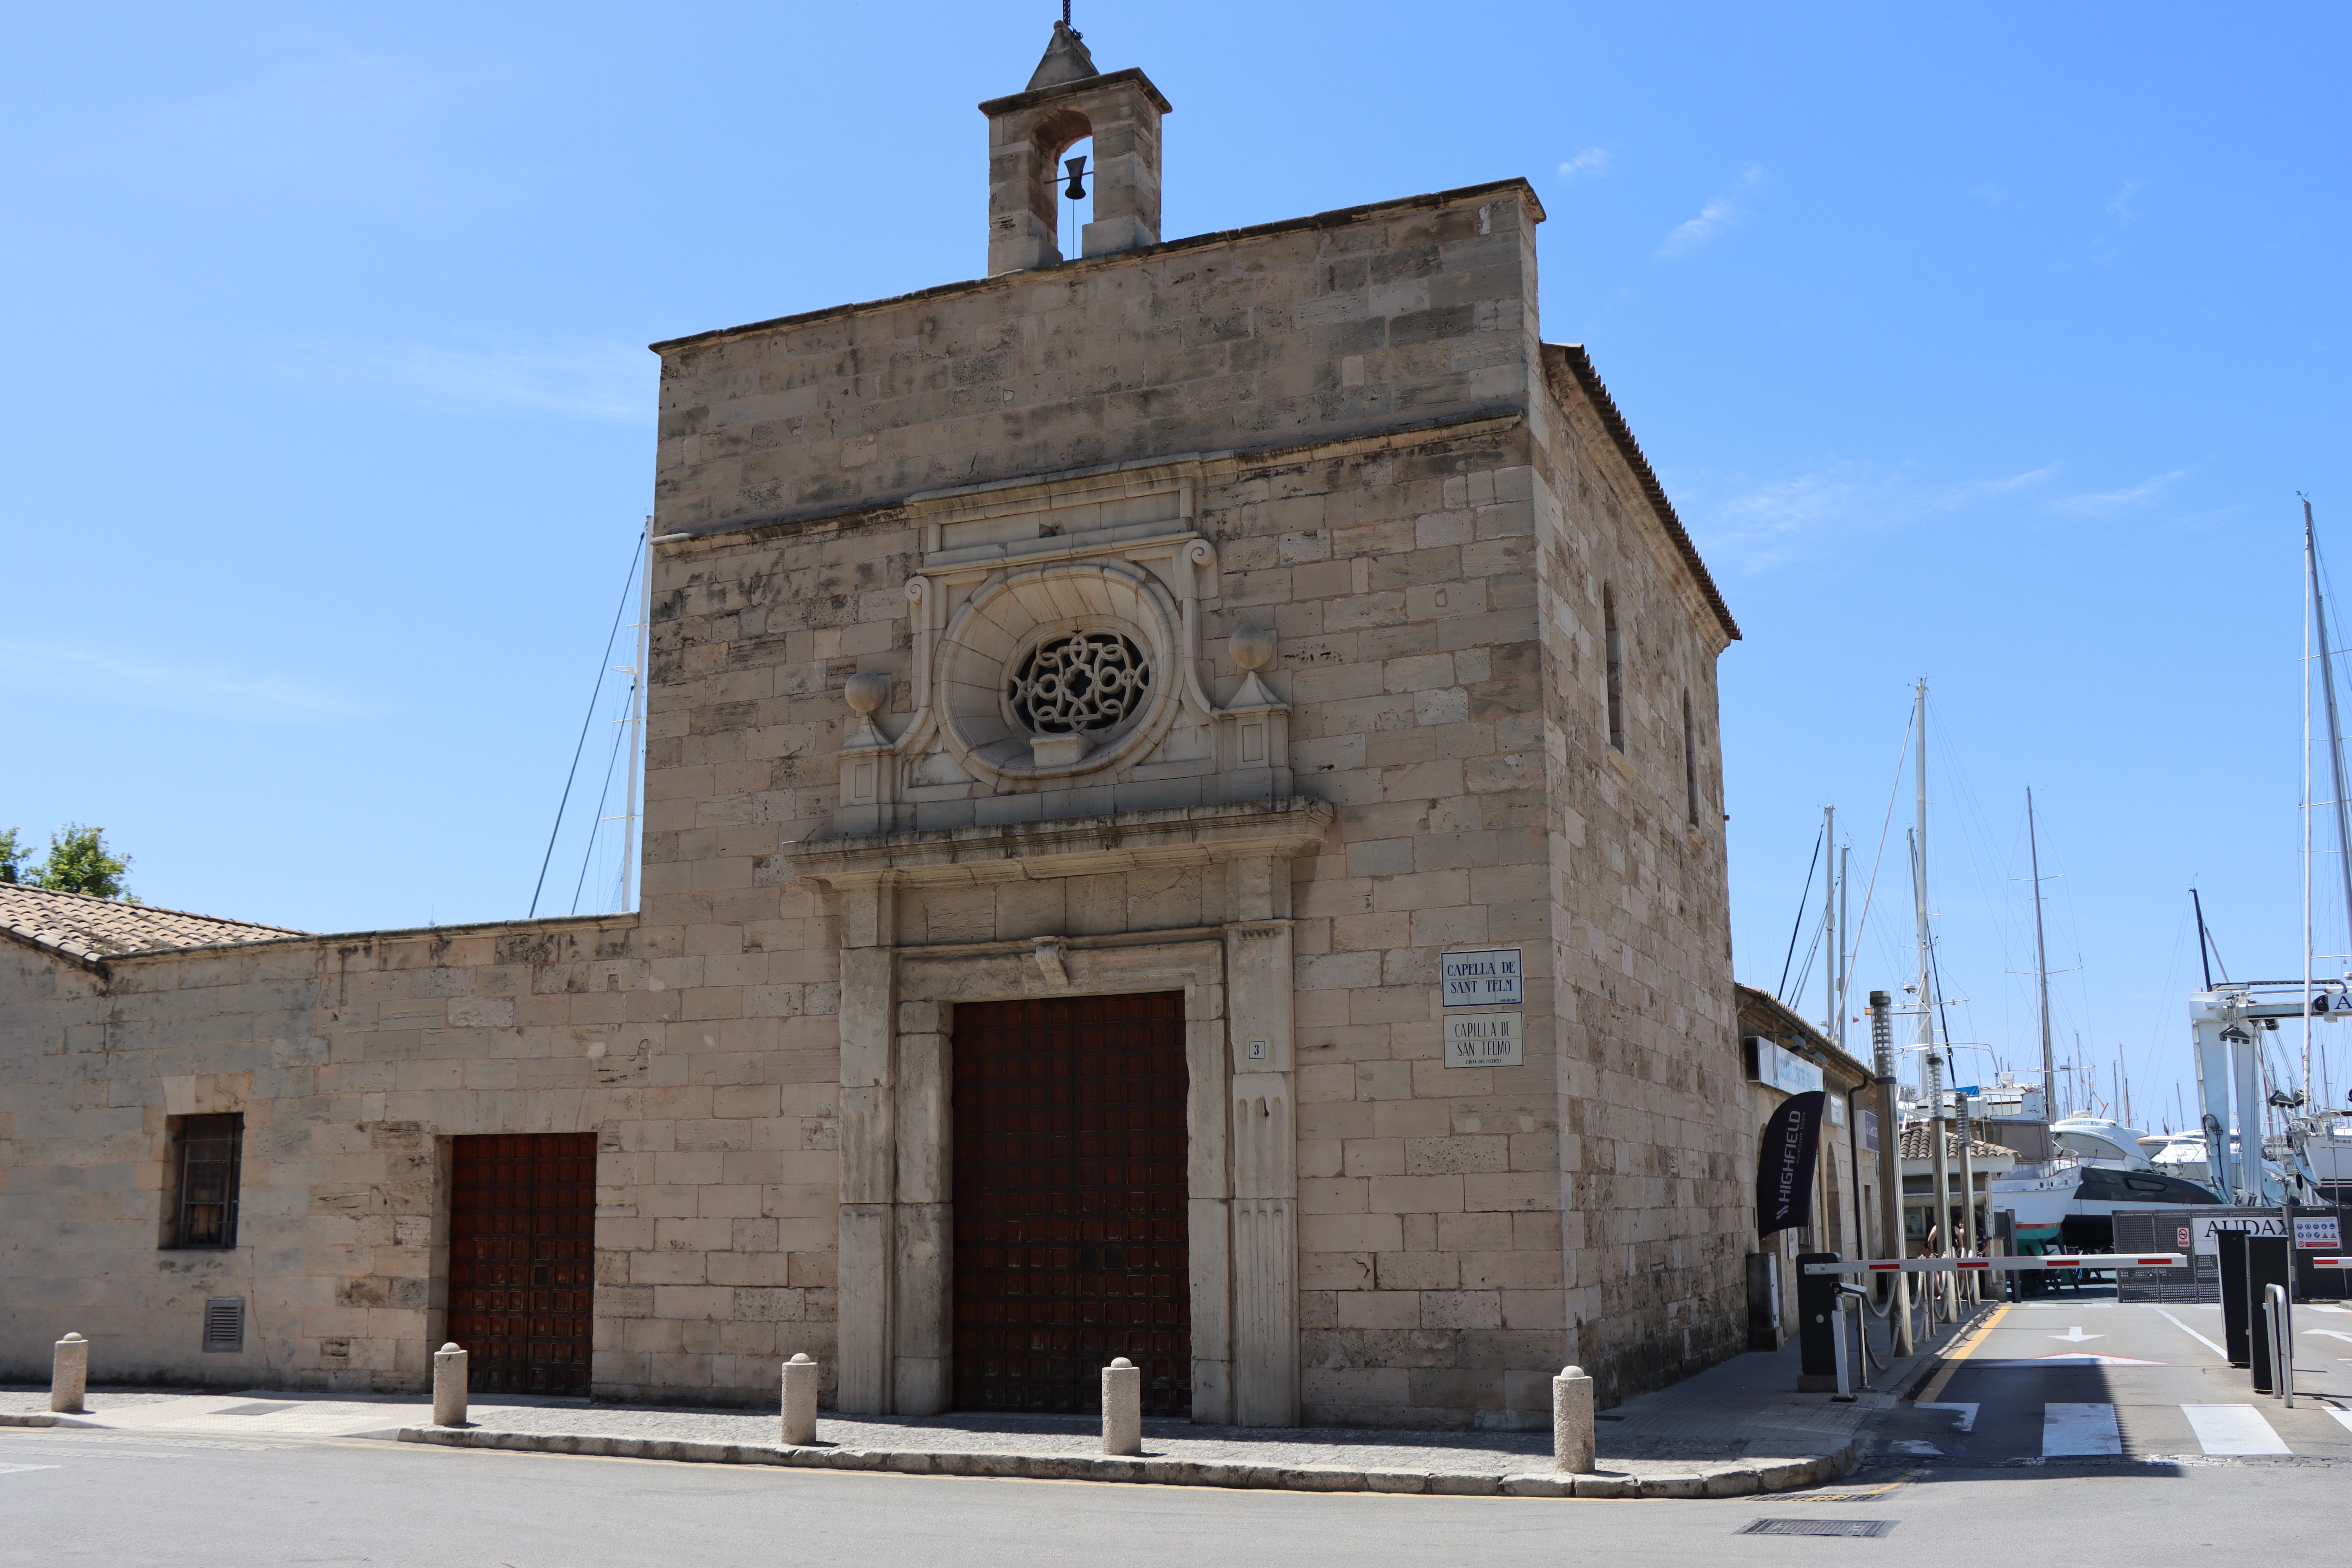 The APB honours the Chapel of Sant Elm in the Port of Palma for International Archives Day